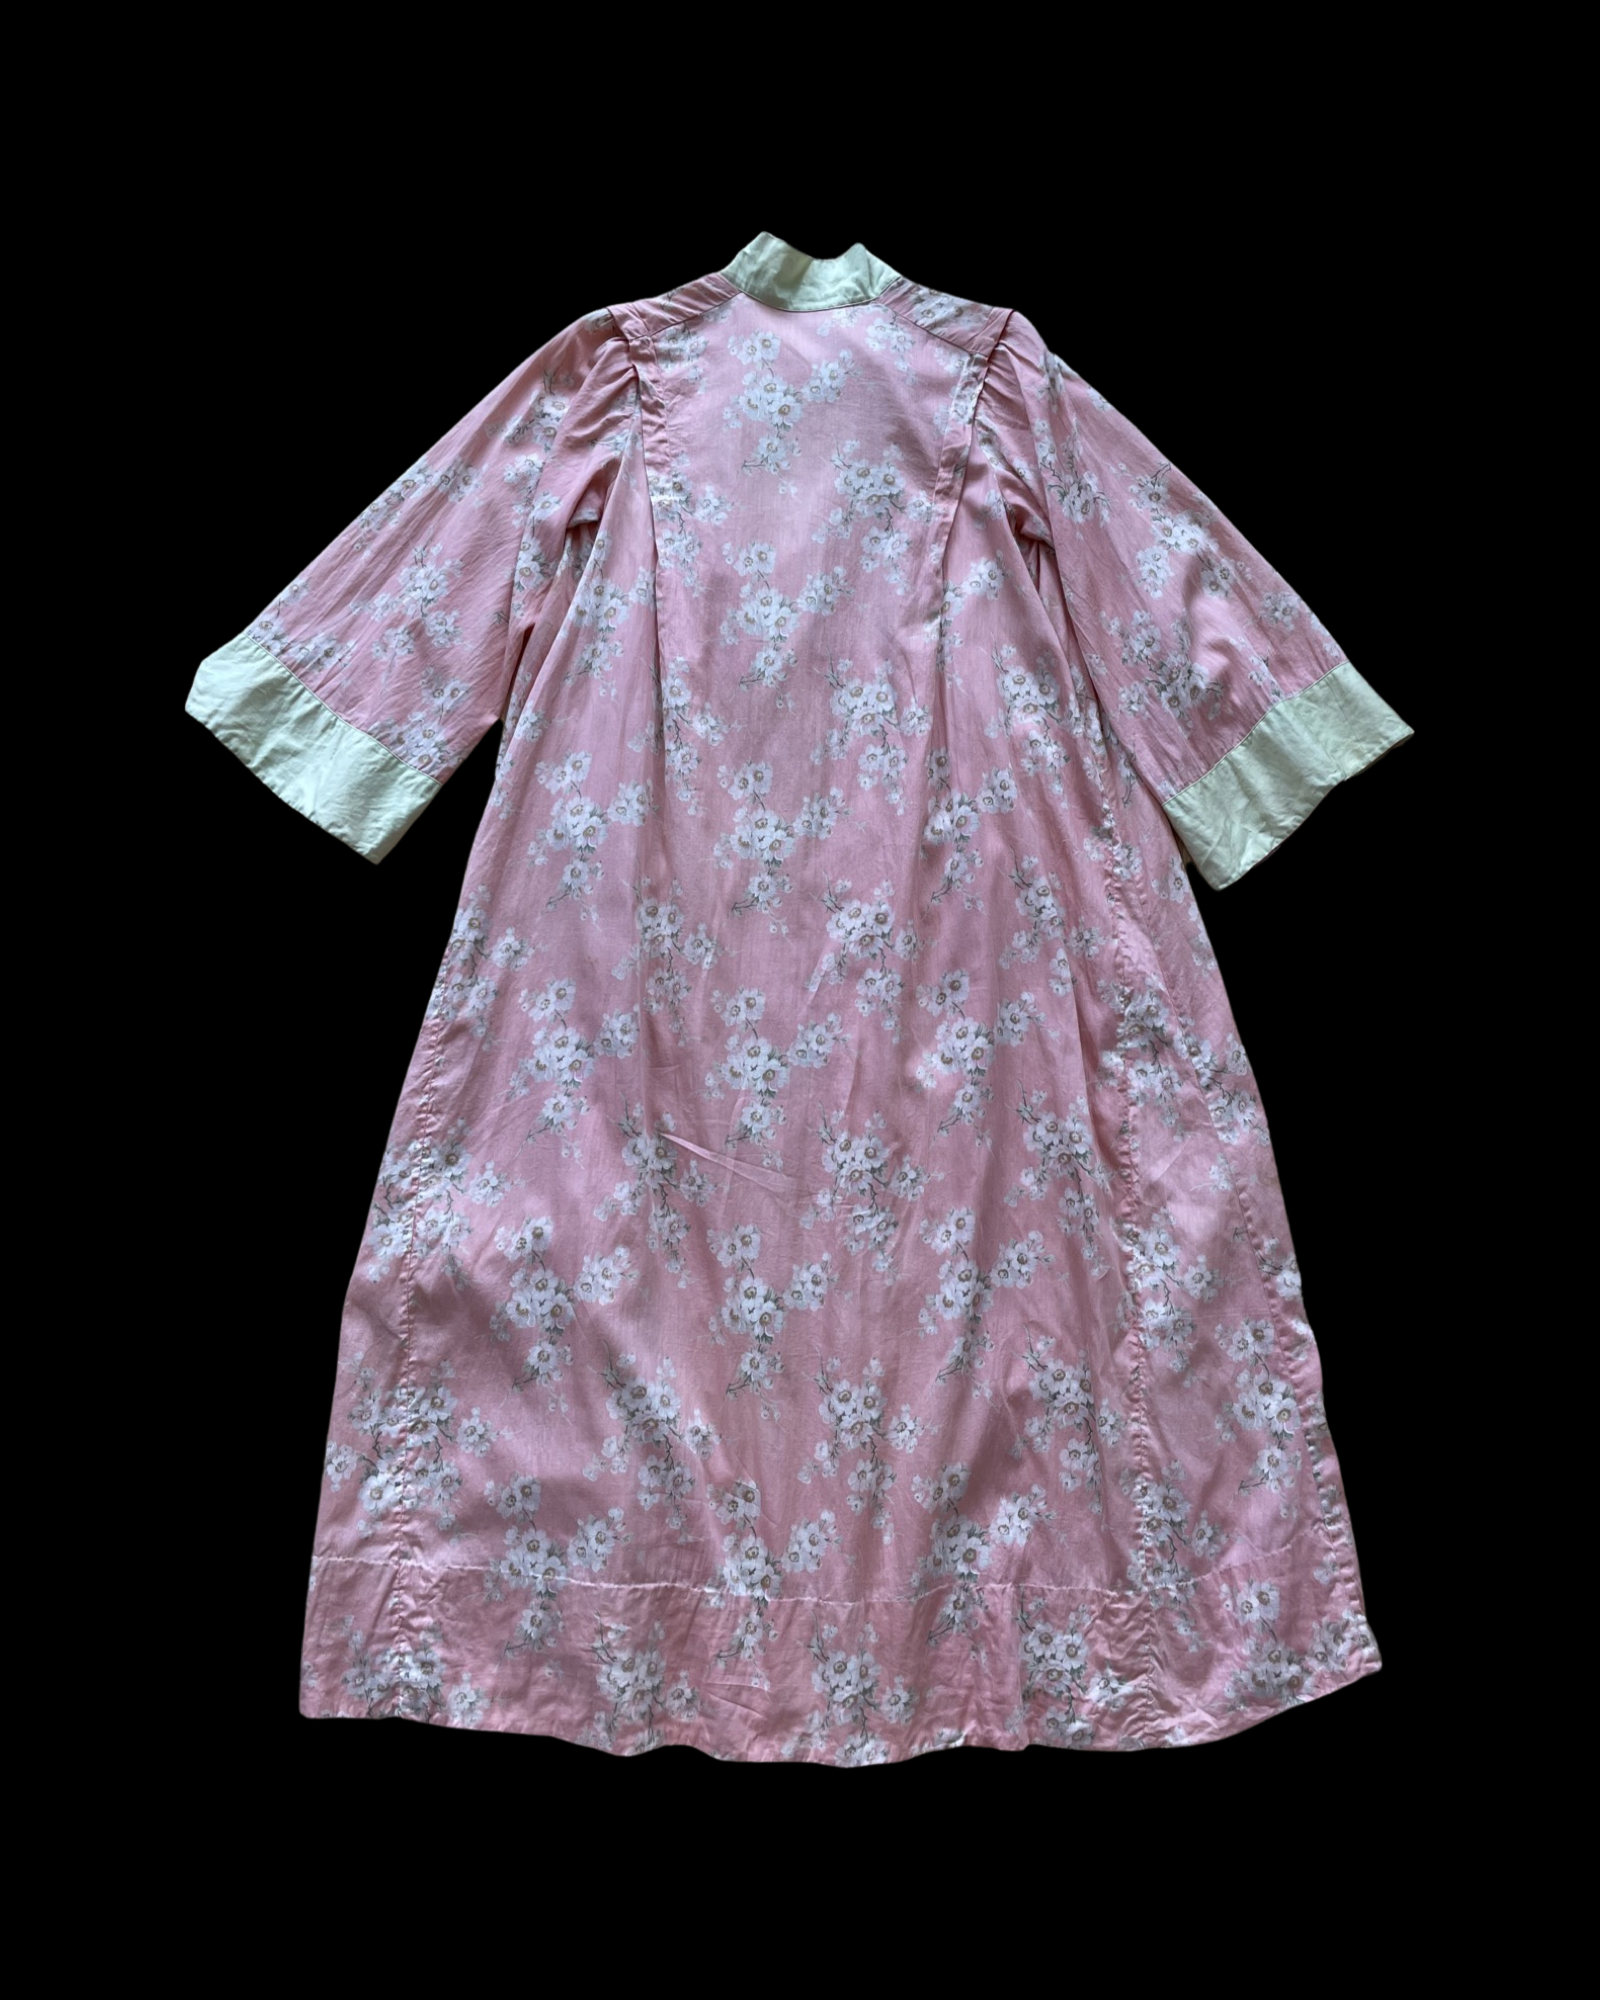 1930s Daisy Print Cotton Dressing Gown